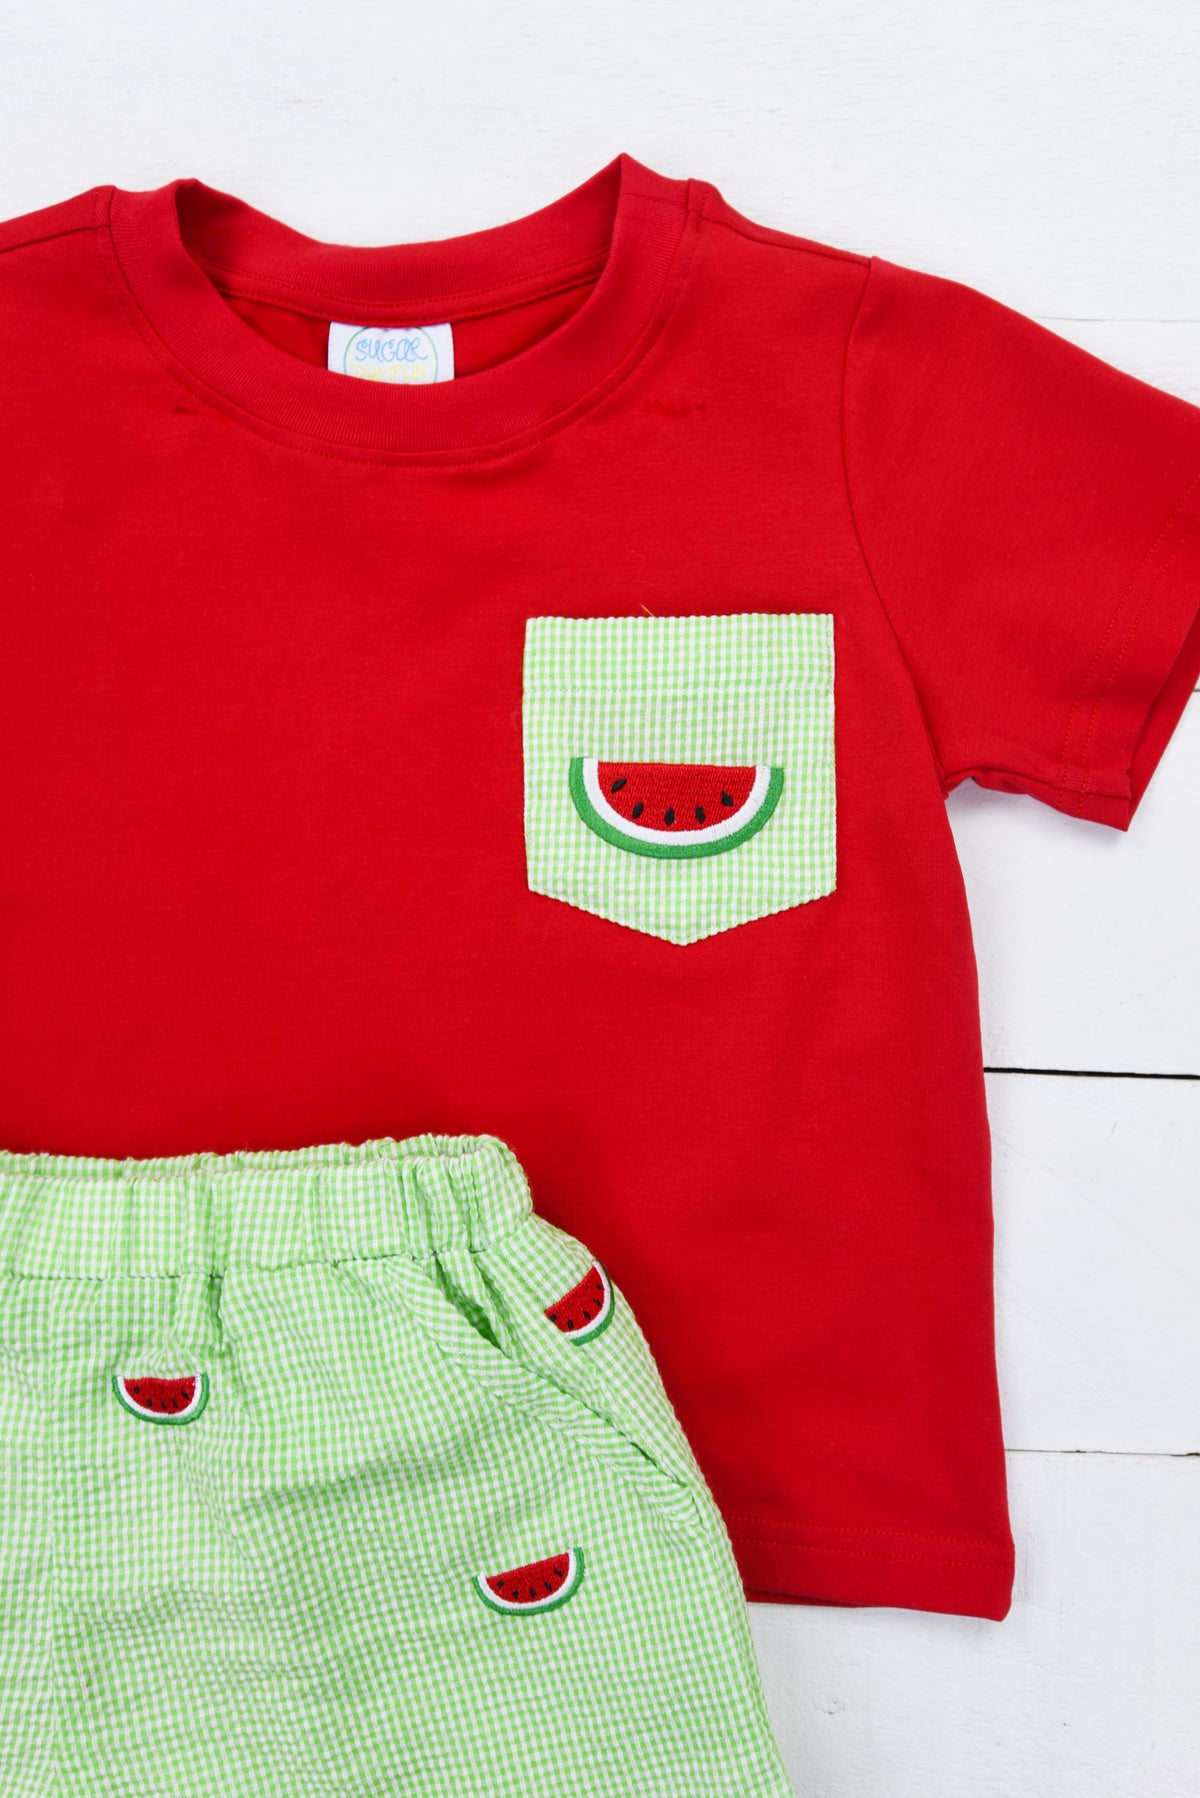 a red shirt and green shorts with a watermelon pocket